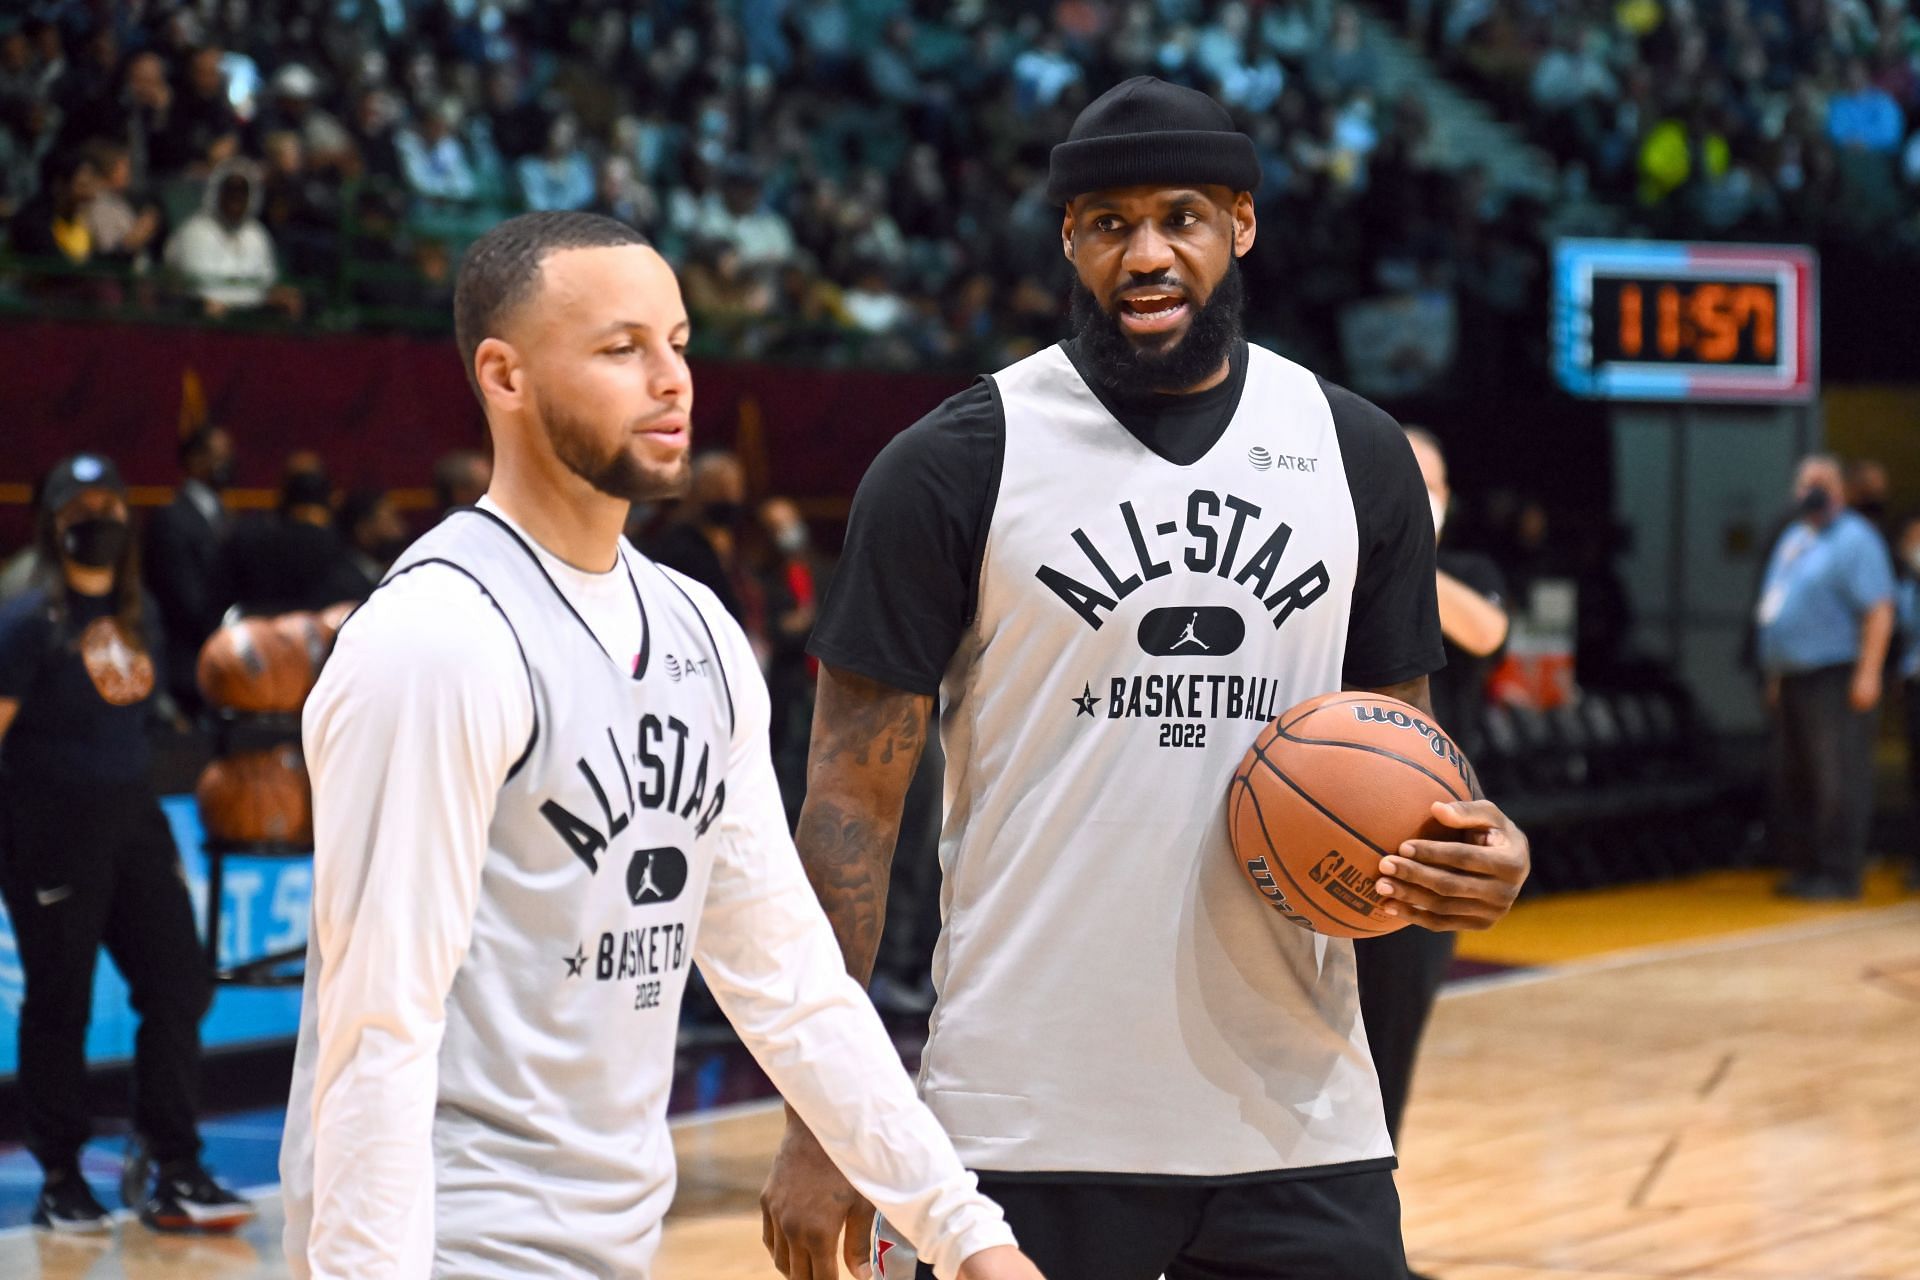 2022 NBA All-Star Game practice: LeBron James, right, and Steph Curry talk.